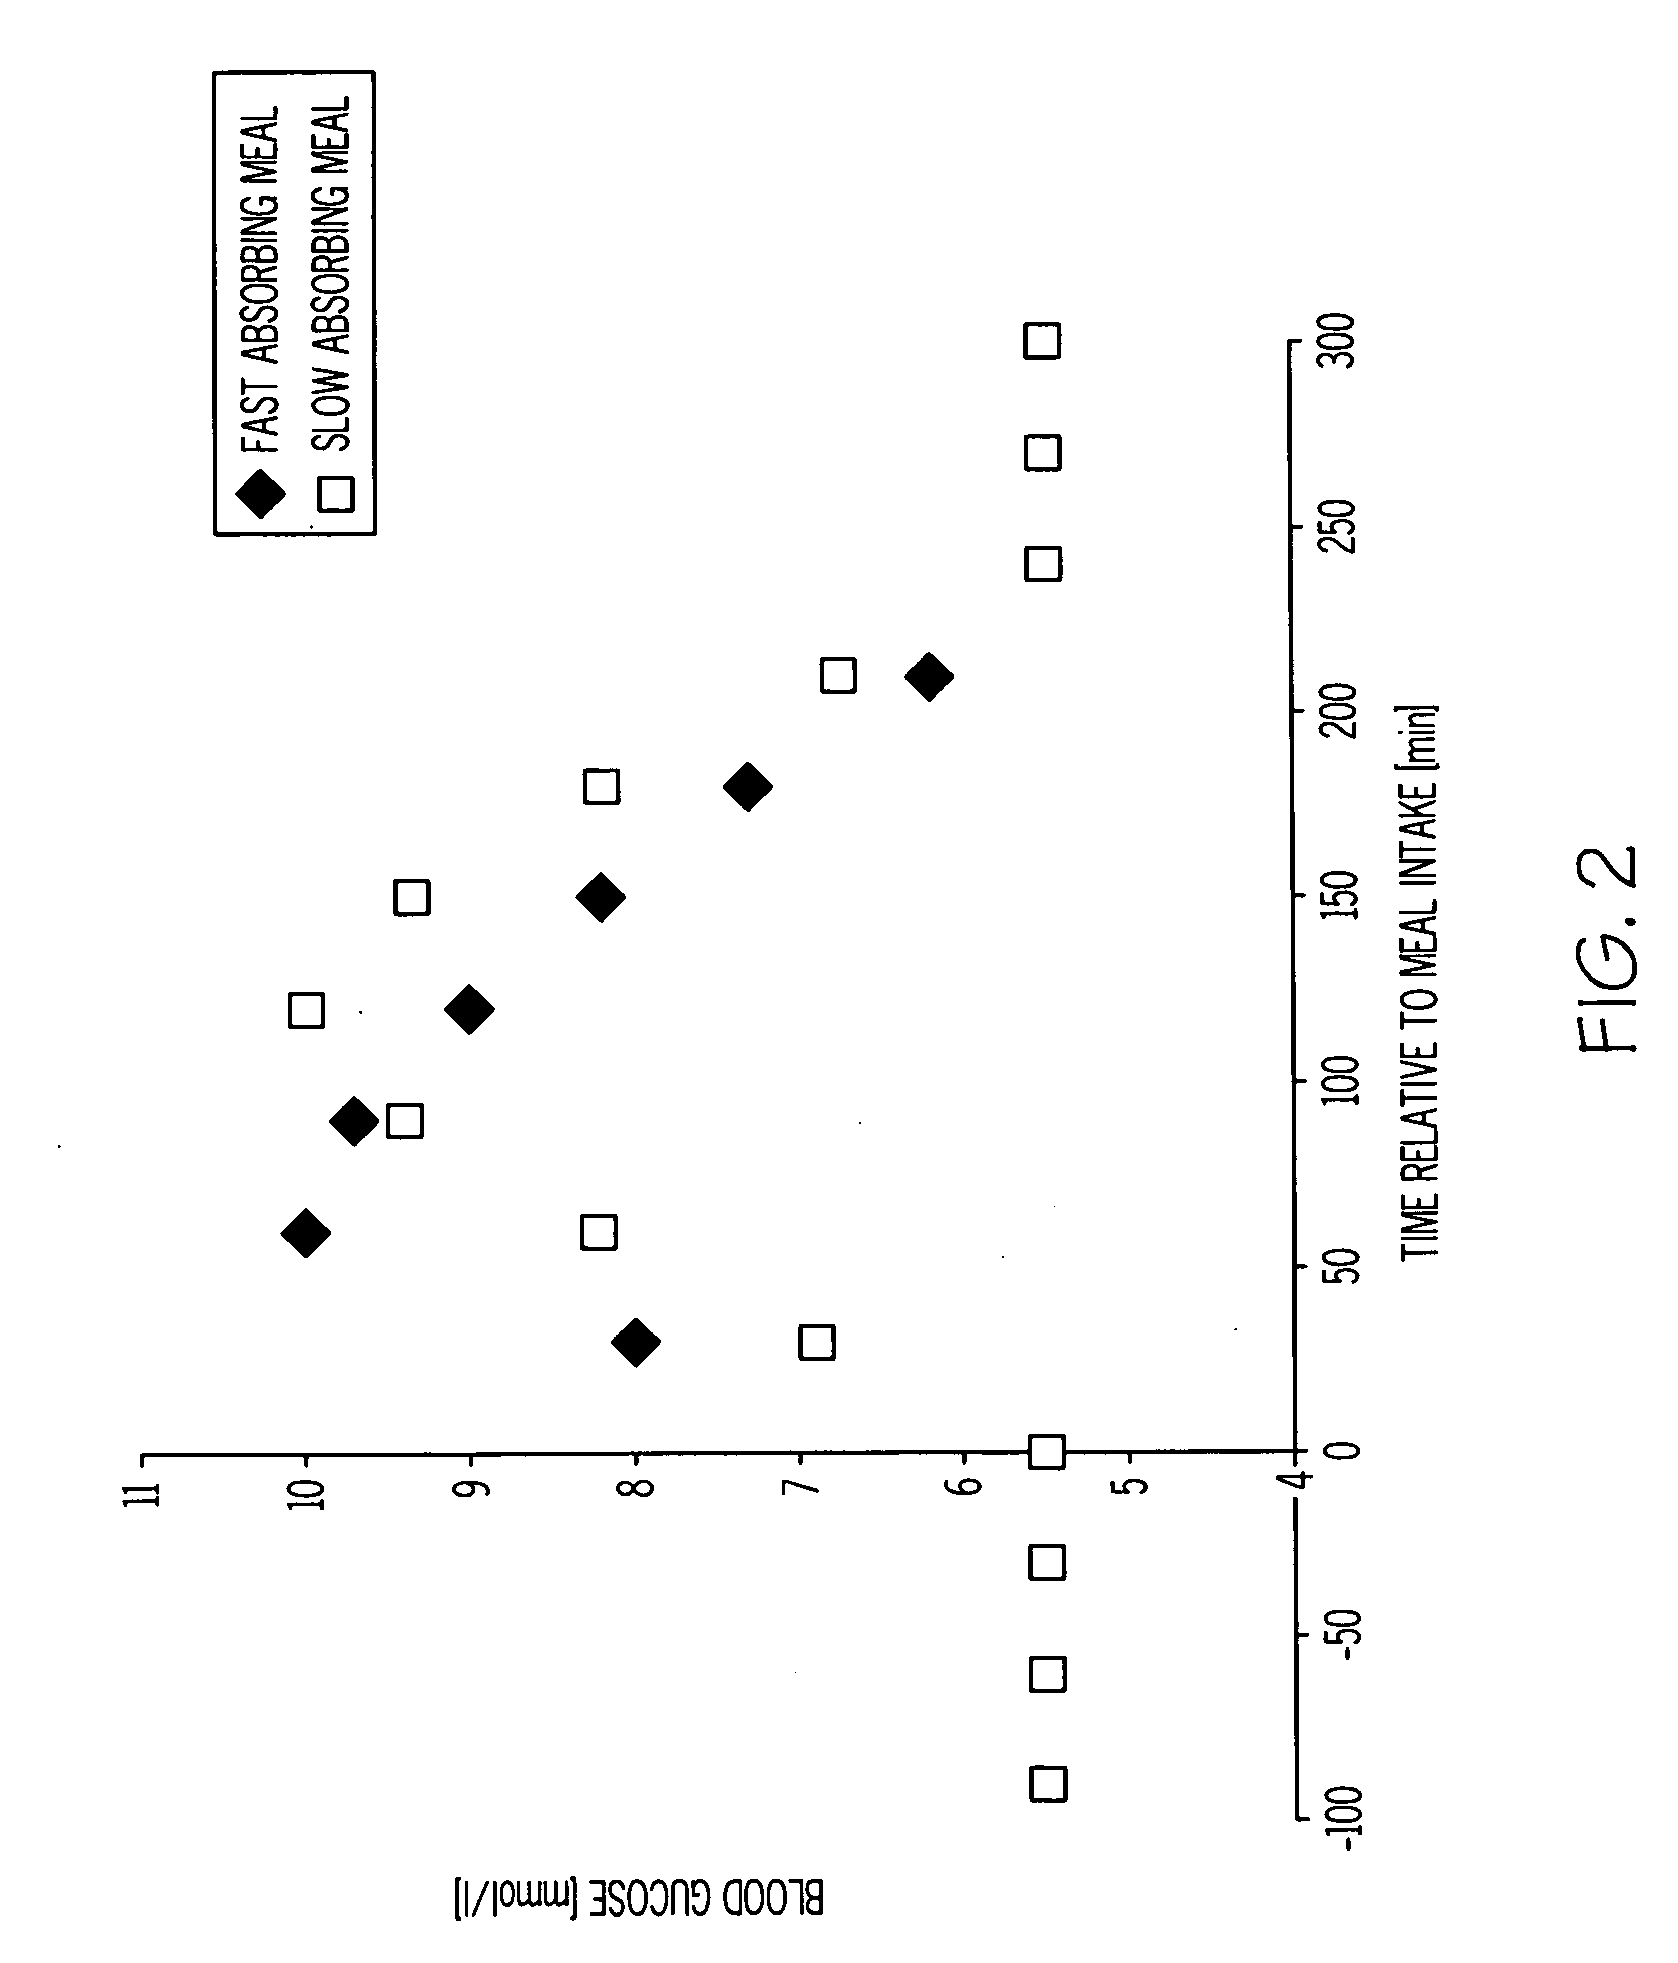 Prandial Blood Glucose Excursion Optimization Method Via Computation of Time-Varying Optimal Insulin Profiles and System Thereof